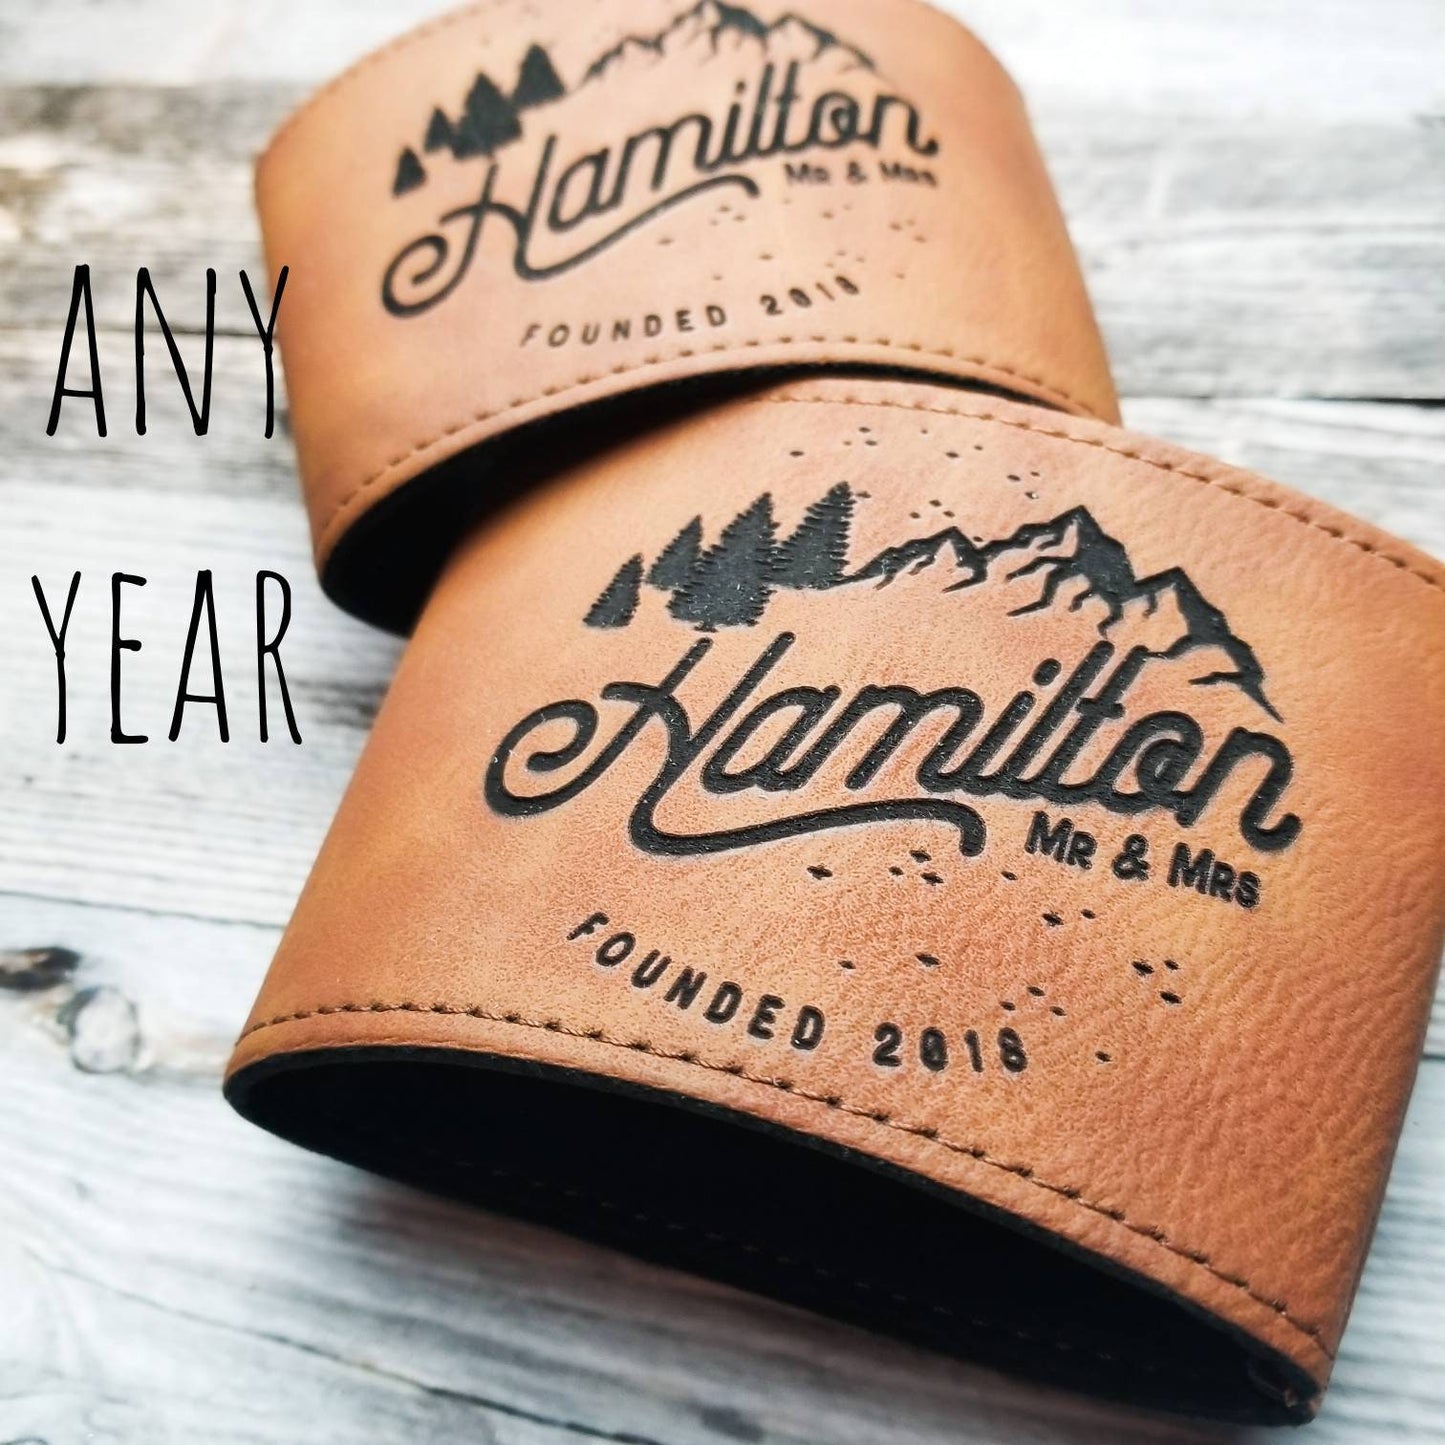 Perfect 3rd Anniversary Gift, Personalized Drink Sleeves, Customize for Any Anniversary Gift